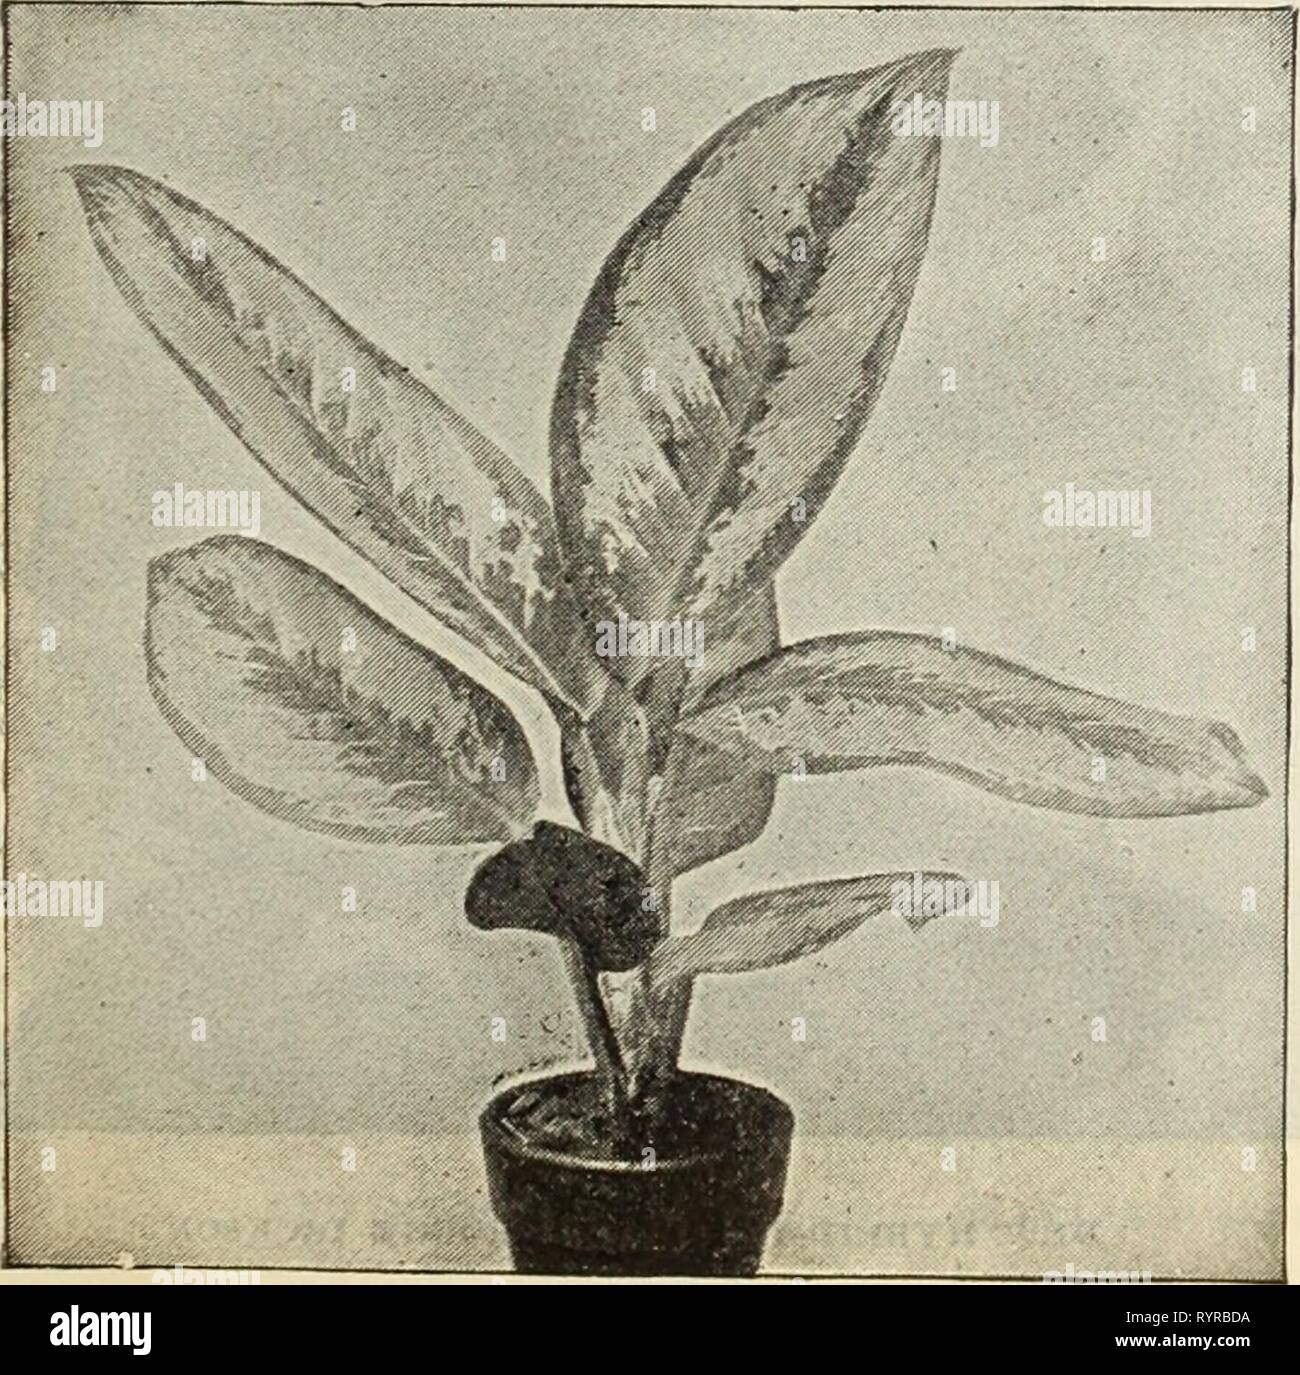 Dreer's mid-summer catalogue 1914 (1914) Dreer's mid-summer catalogue 1914 . dreersmidsummerc1914henr Year: 1914  PHCEXIX BOKBELENII Thrinax Parviflora. 3-inch pots, 50 cts. each. Thrinax Radiata. A pretty fan-leaved variety, with small, deeply cut foliage. 4-inch pots, 50 cts. each. PASSIFLORA PRINCEPS (Passion Flower) This is one of the best greenhouse climbers, a rare and ehowy variety with bright red flowers. $1.00 each. PHYLLOT/ENIUM Lindeni. A handsome hothouse plant of easy culture, with attractive light green hastate leaves, the broad rib and veins creamy-white. $1.00 each. Lindeni Mag Stock Photo